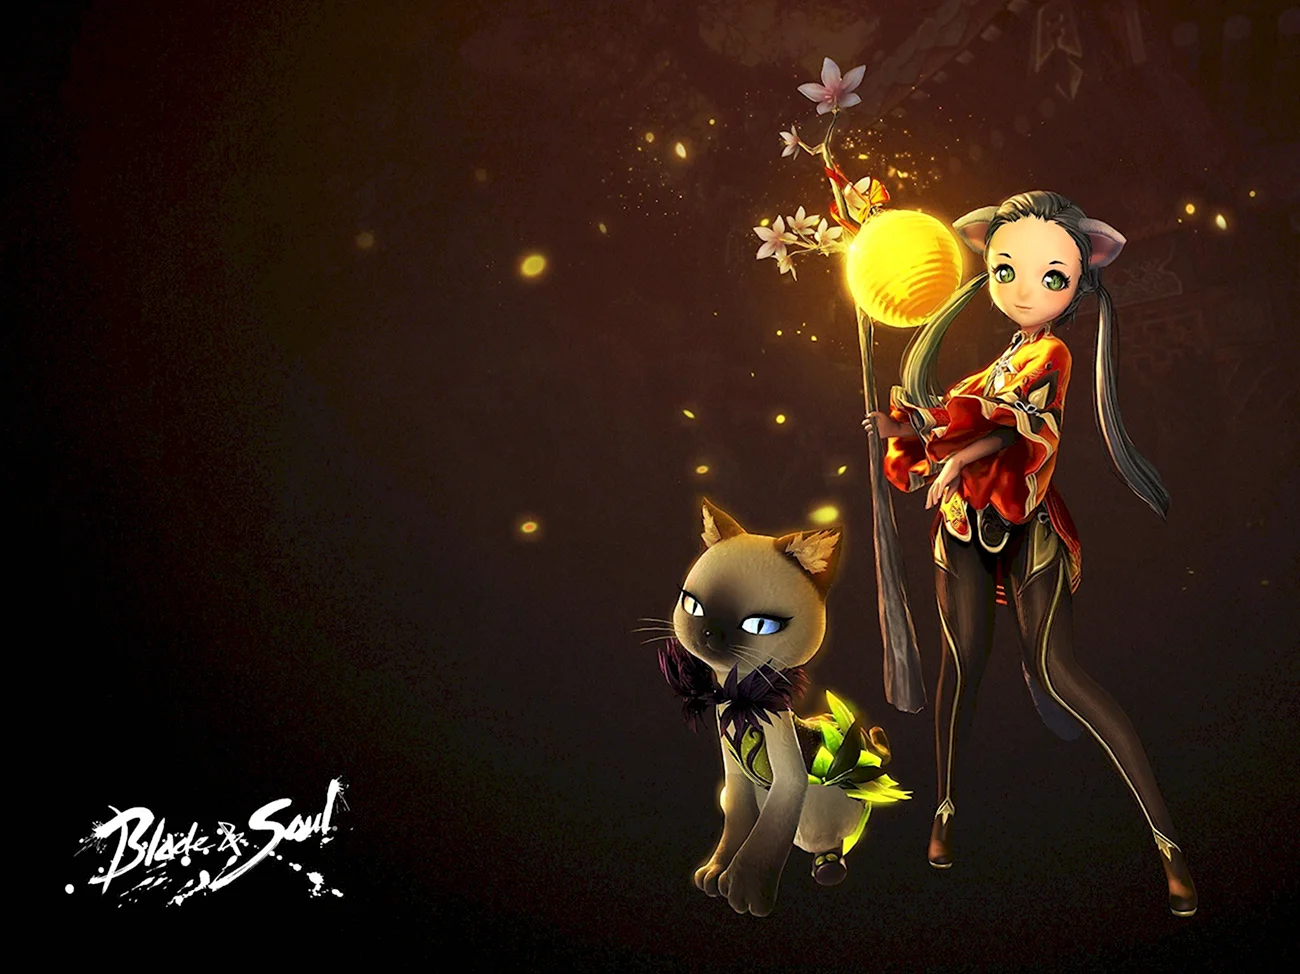 Blade and Soul котовод. Мем